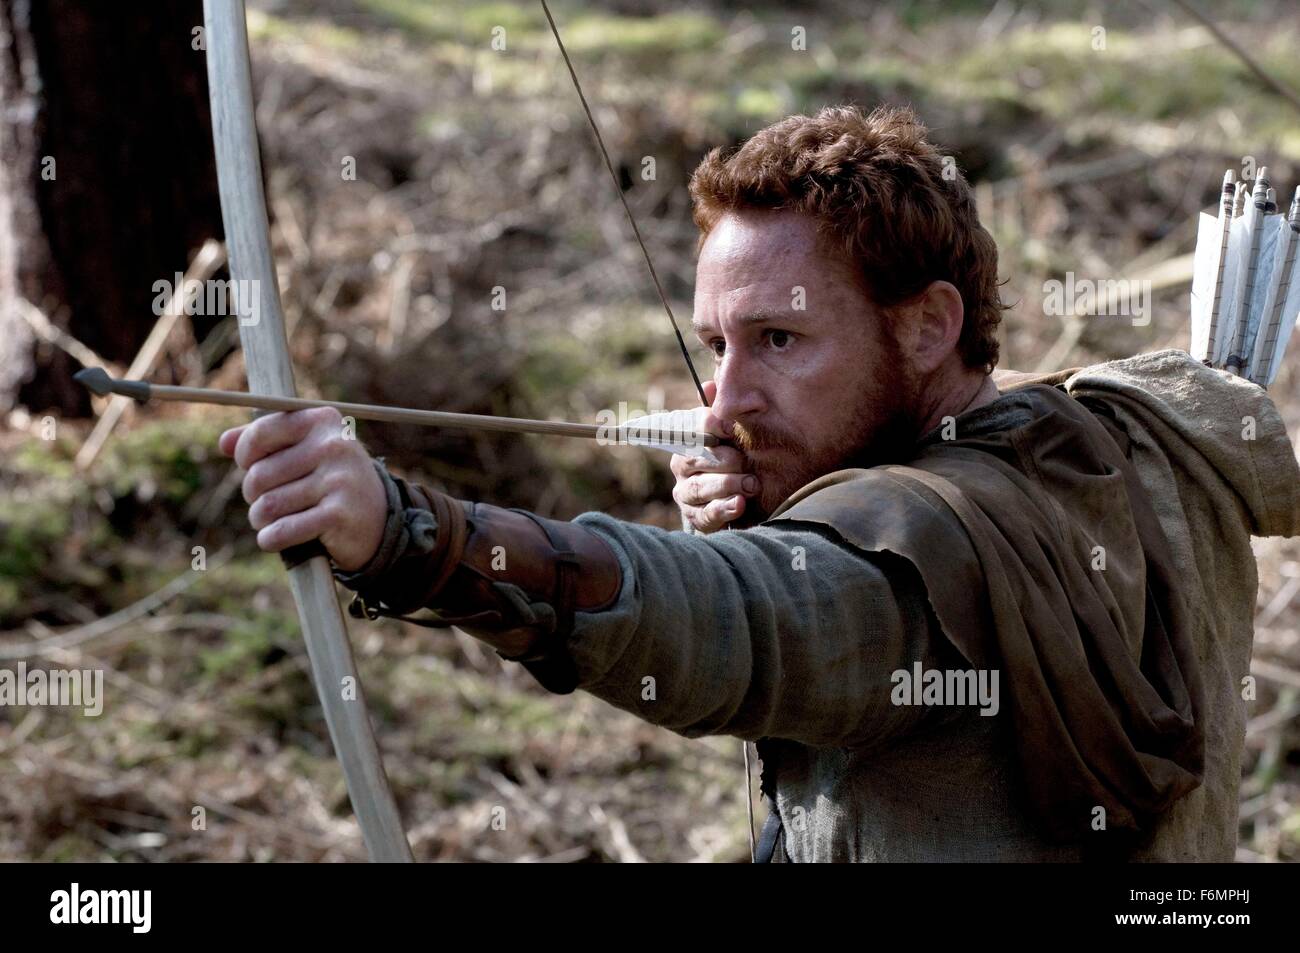 RELEASE DATE: May 14, 2010 MOVIE TITLE: Robin Hood STUDIO: Universal  Pictures DIRECTOR: Ridley Scott PLOT: The story of an archer in the army of  Richard Coeur de Lion who fights against